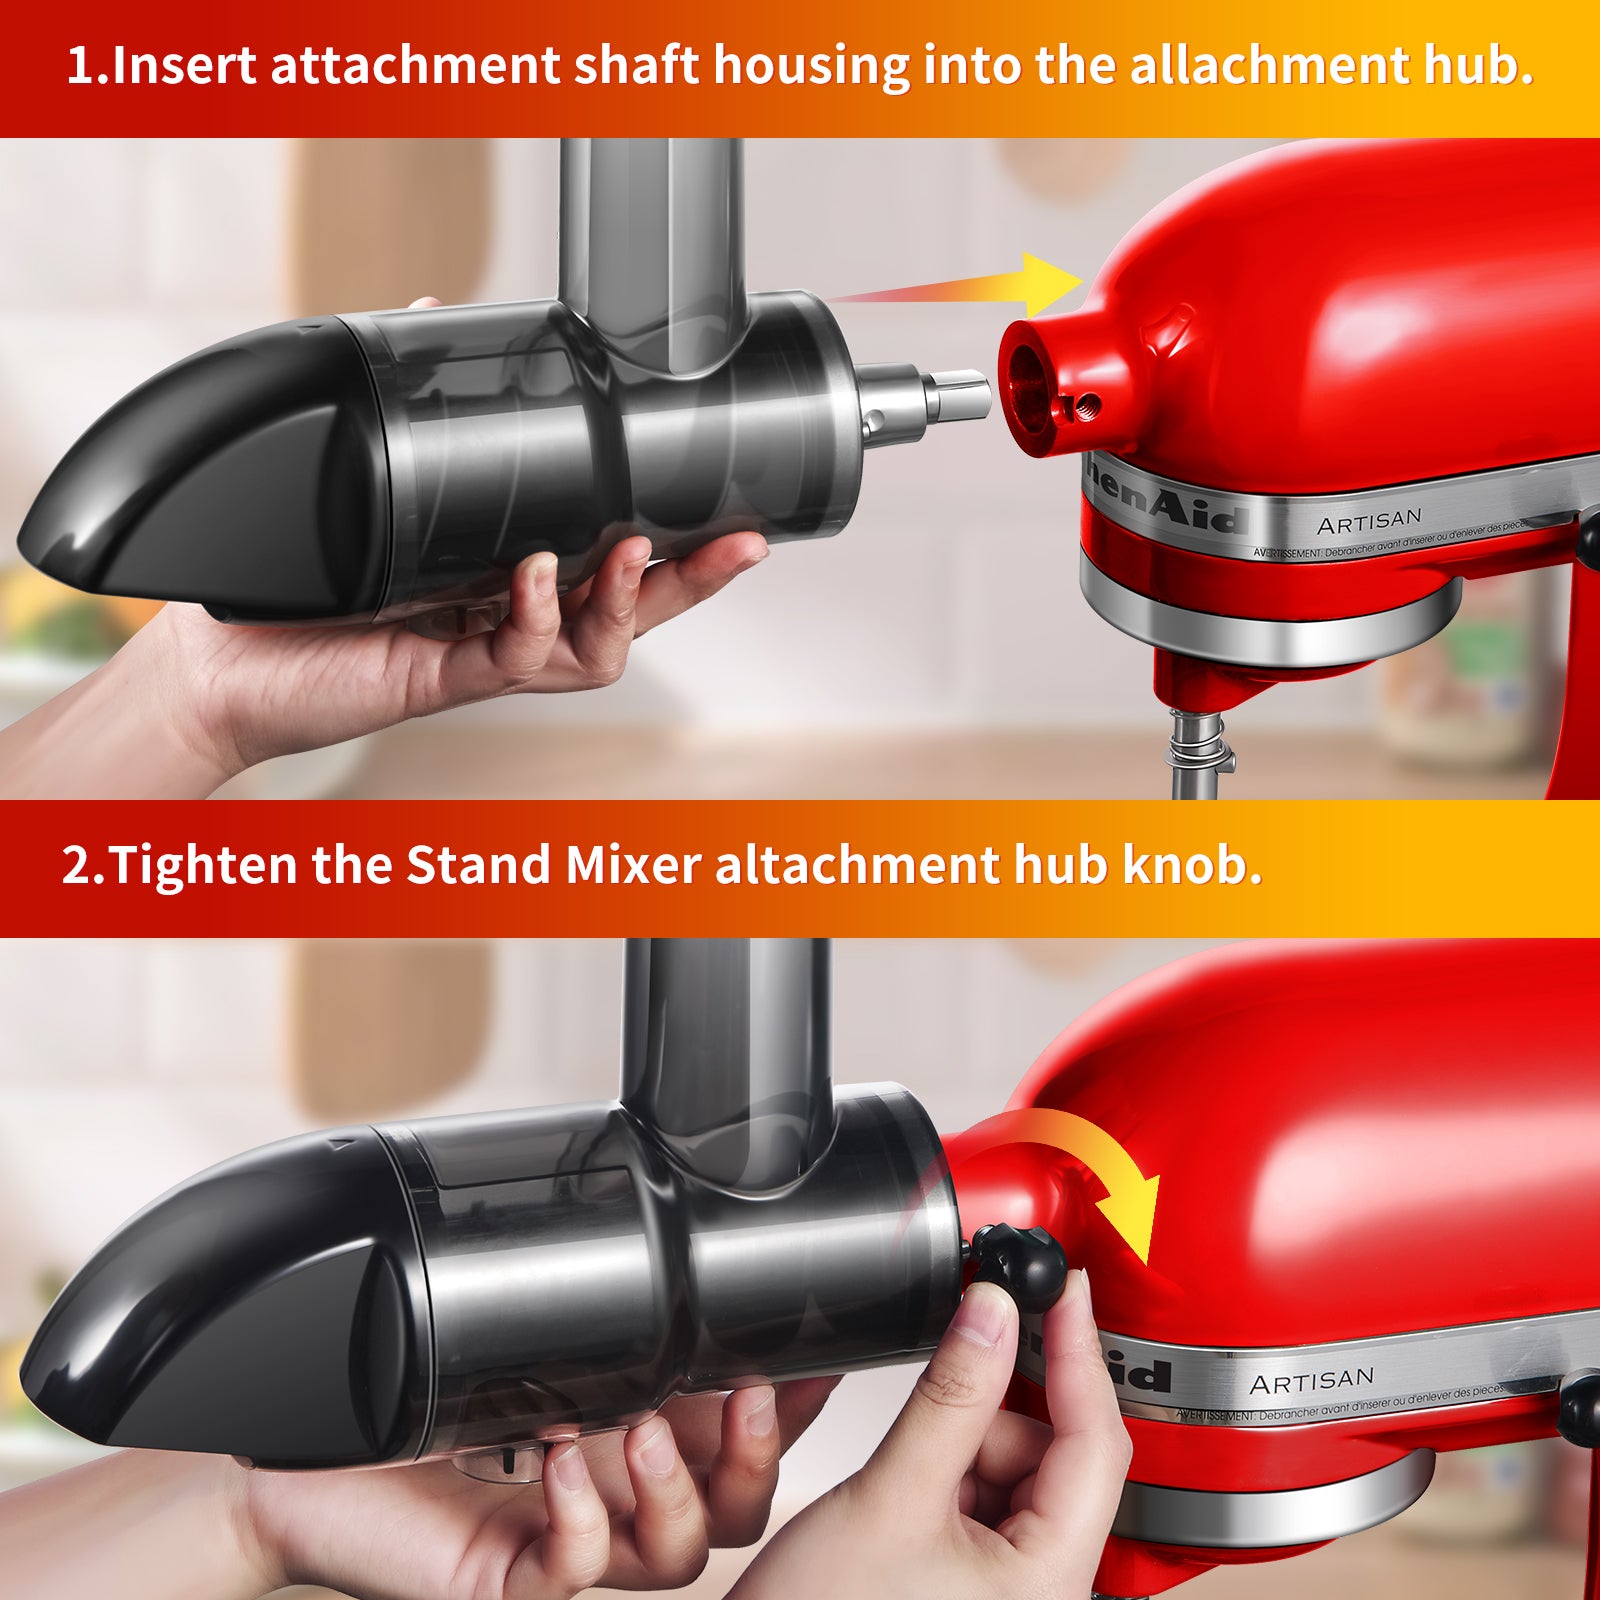 AMZCHEF Slow Masticating Juicer Attachment for KitchenAid Stand Mixers, AMZCHEF Cold Press Juicer Attachment for KitchenAid Mixers, Slow Juicer Attachment with Cleaning Brush, Easy to Clean